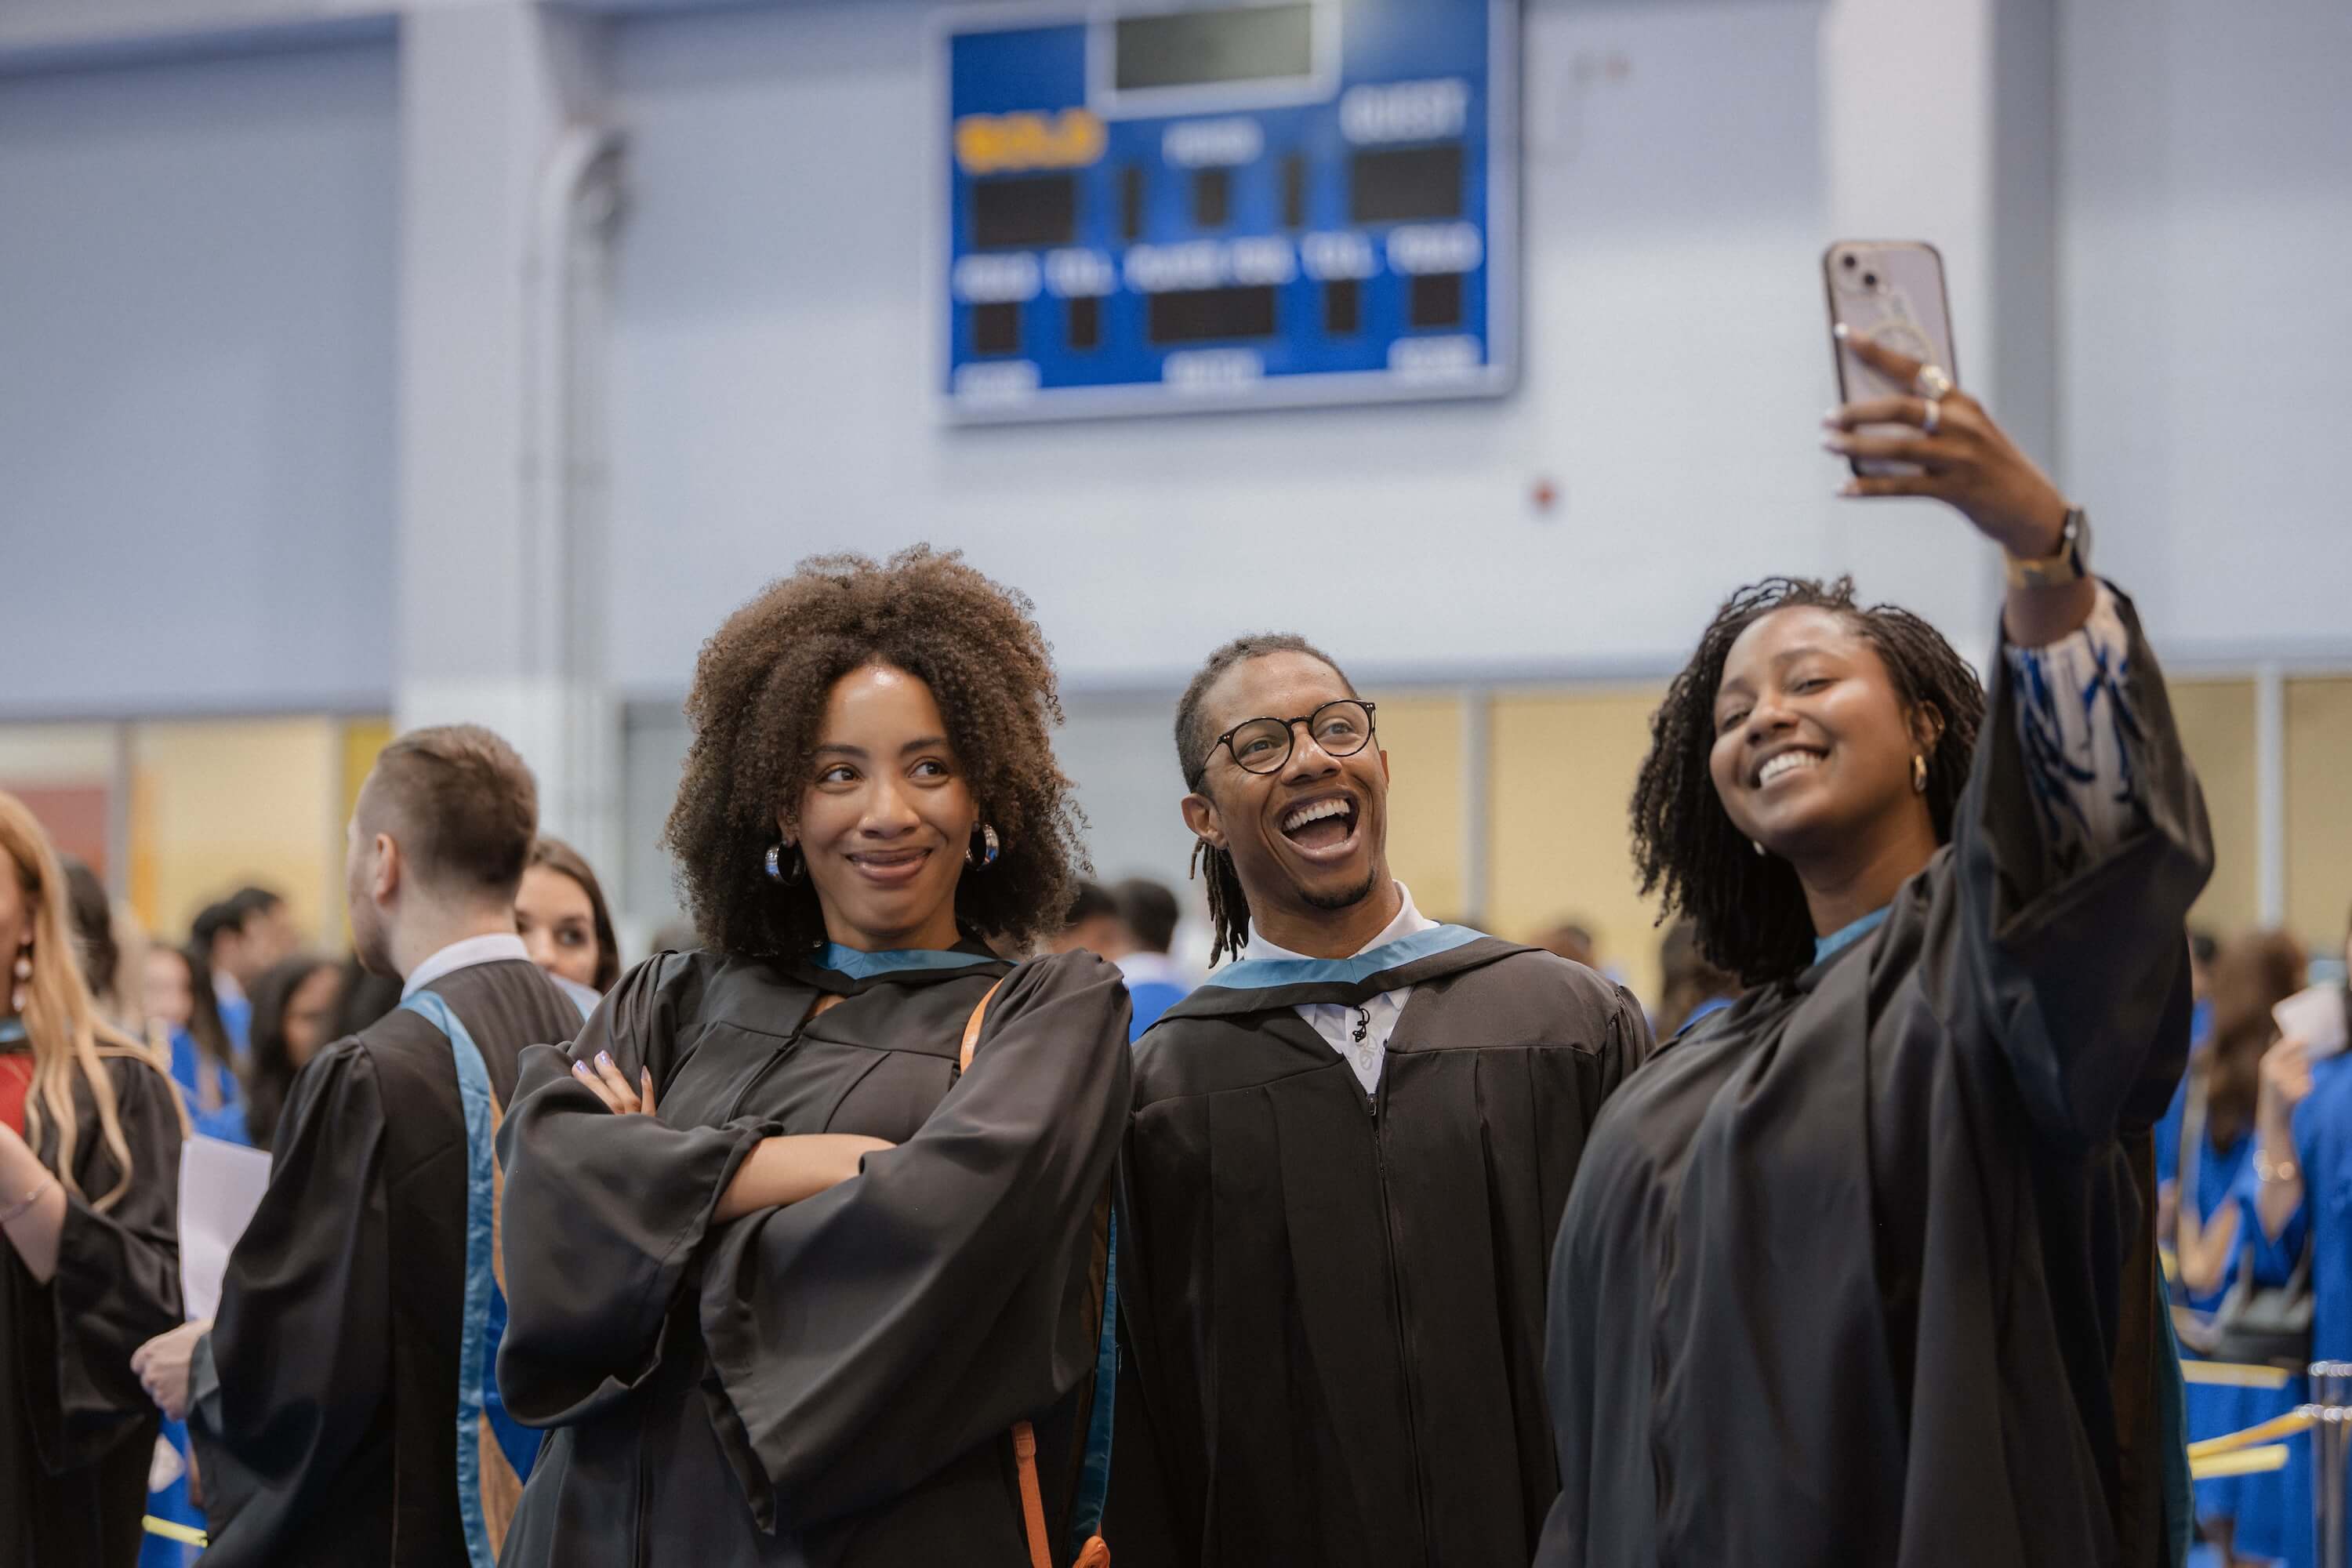 Three graduates posing for a selfie at Convocation.